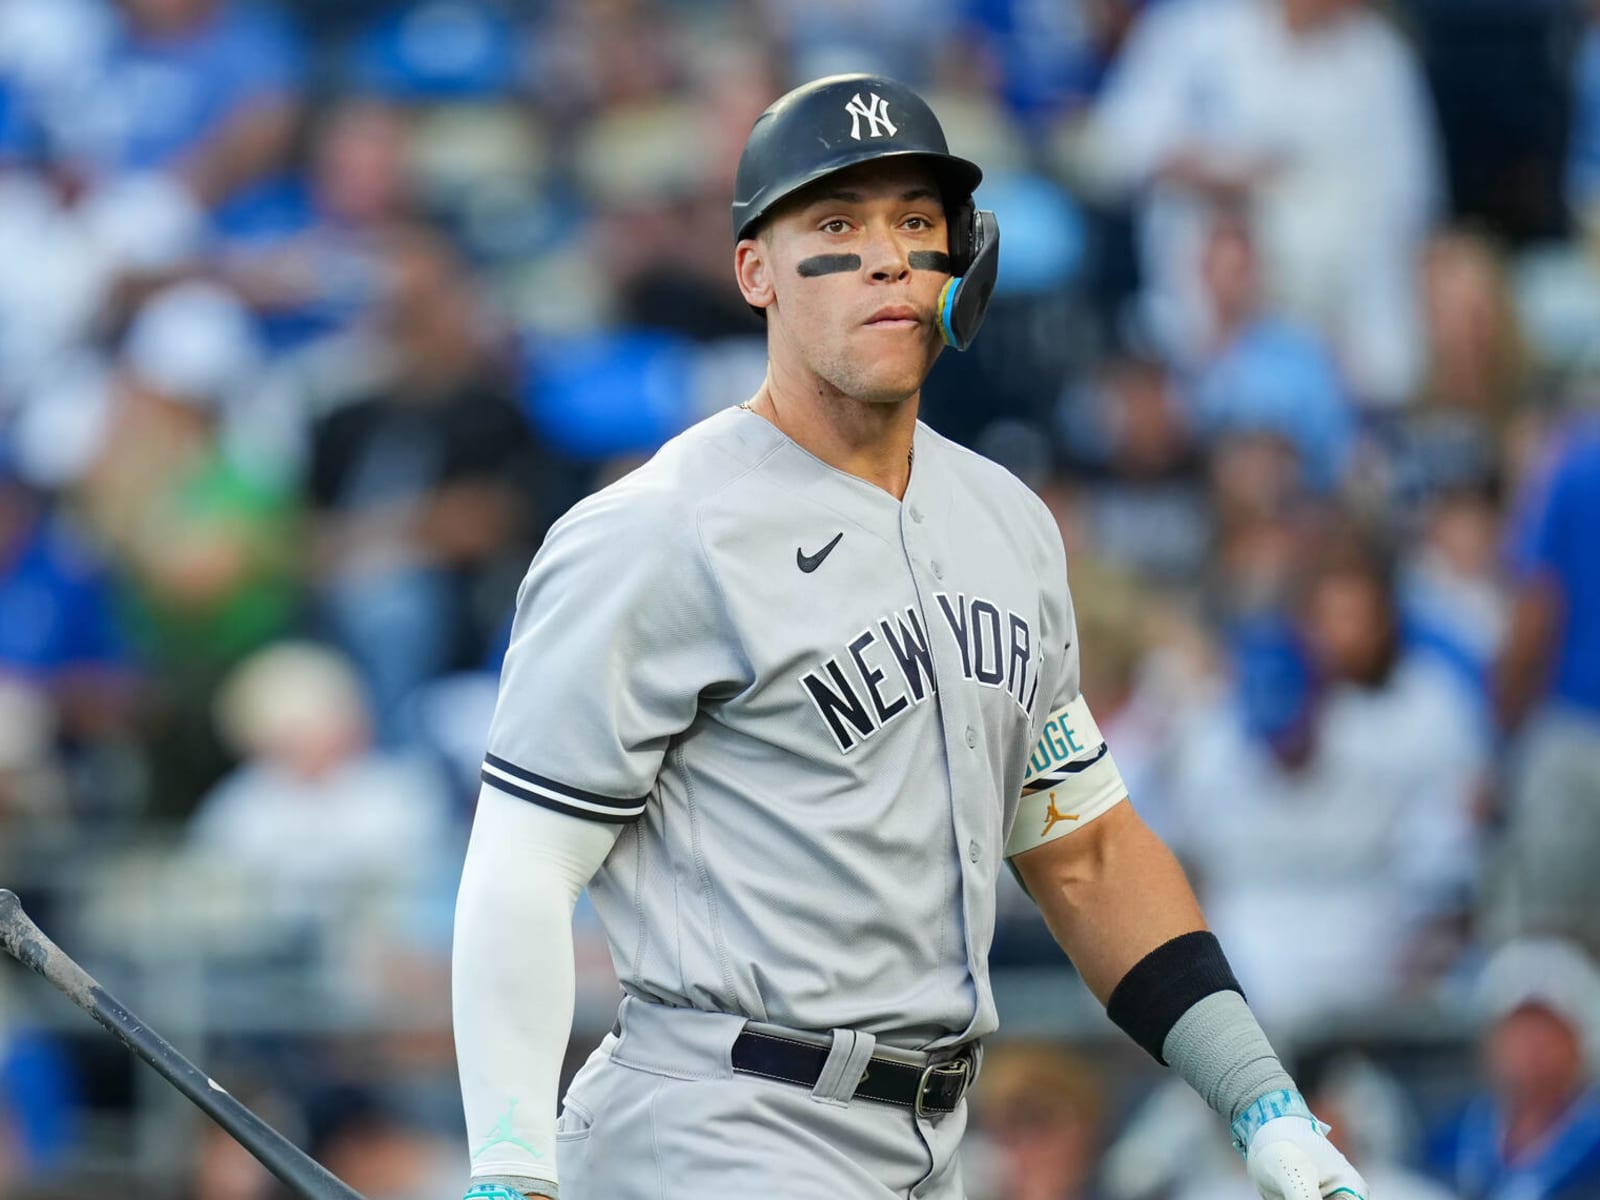 Here's what the Yankees lineup would look like with Ohtani. They'd